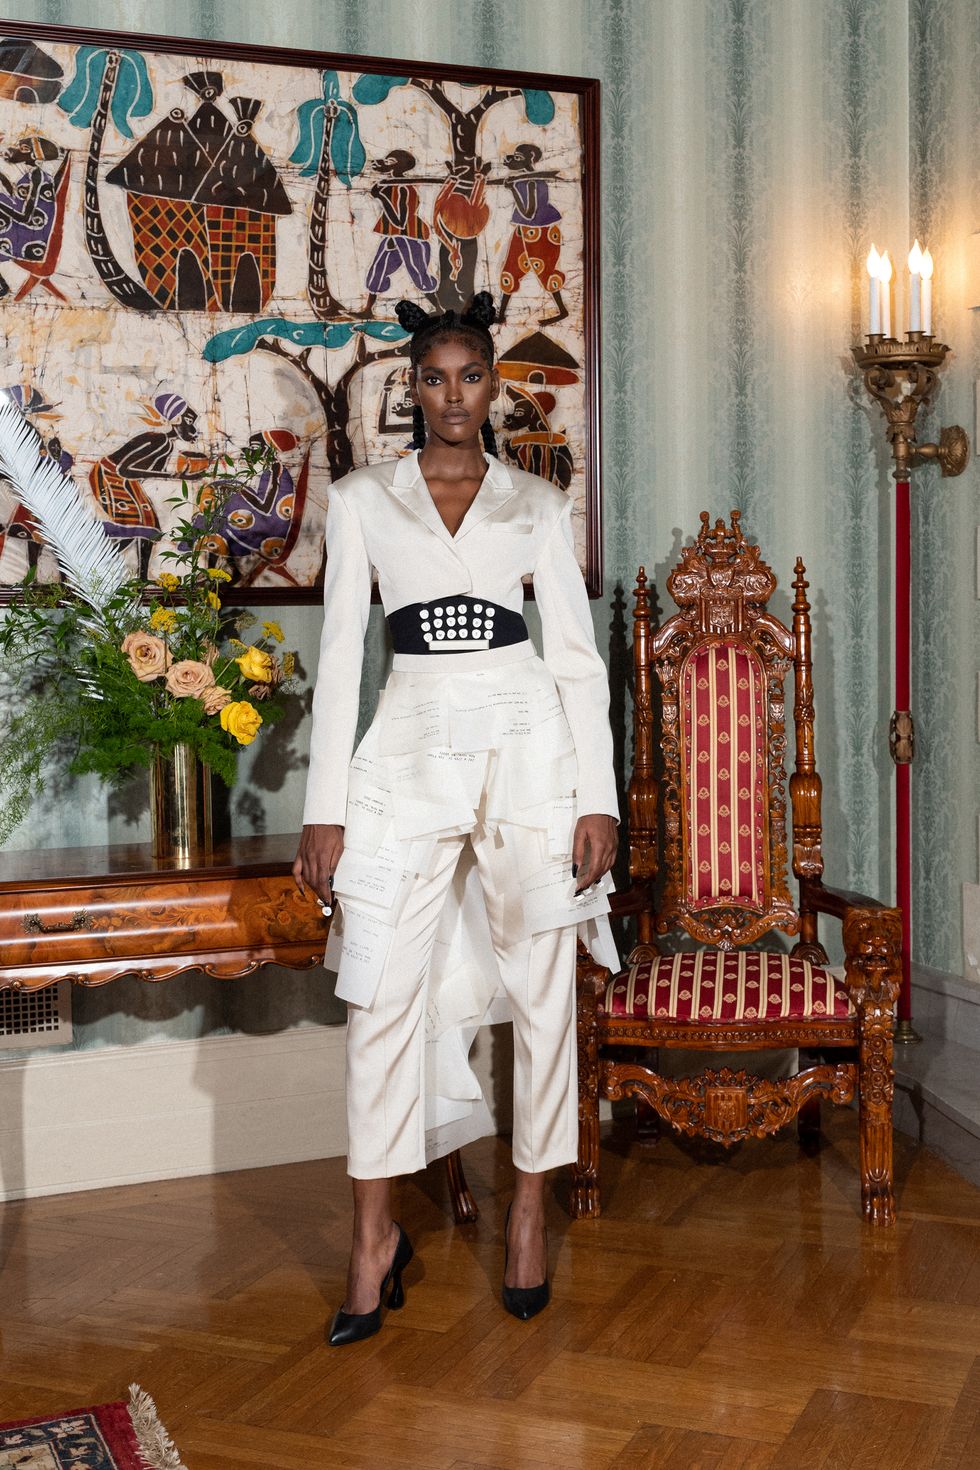 Pyer Moss Celebrates Black Invention With Its First Couture Collection